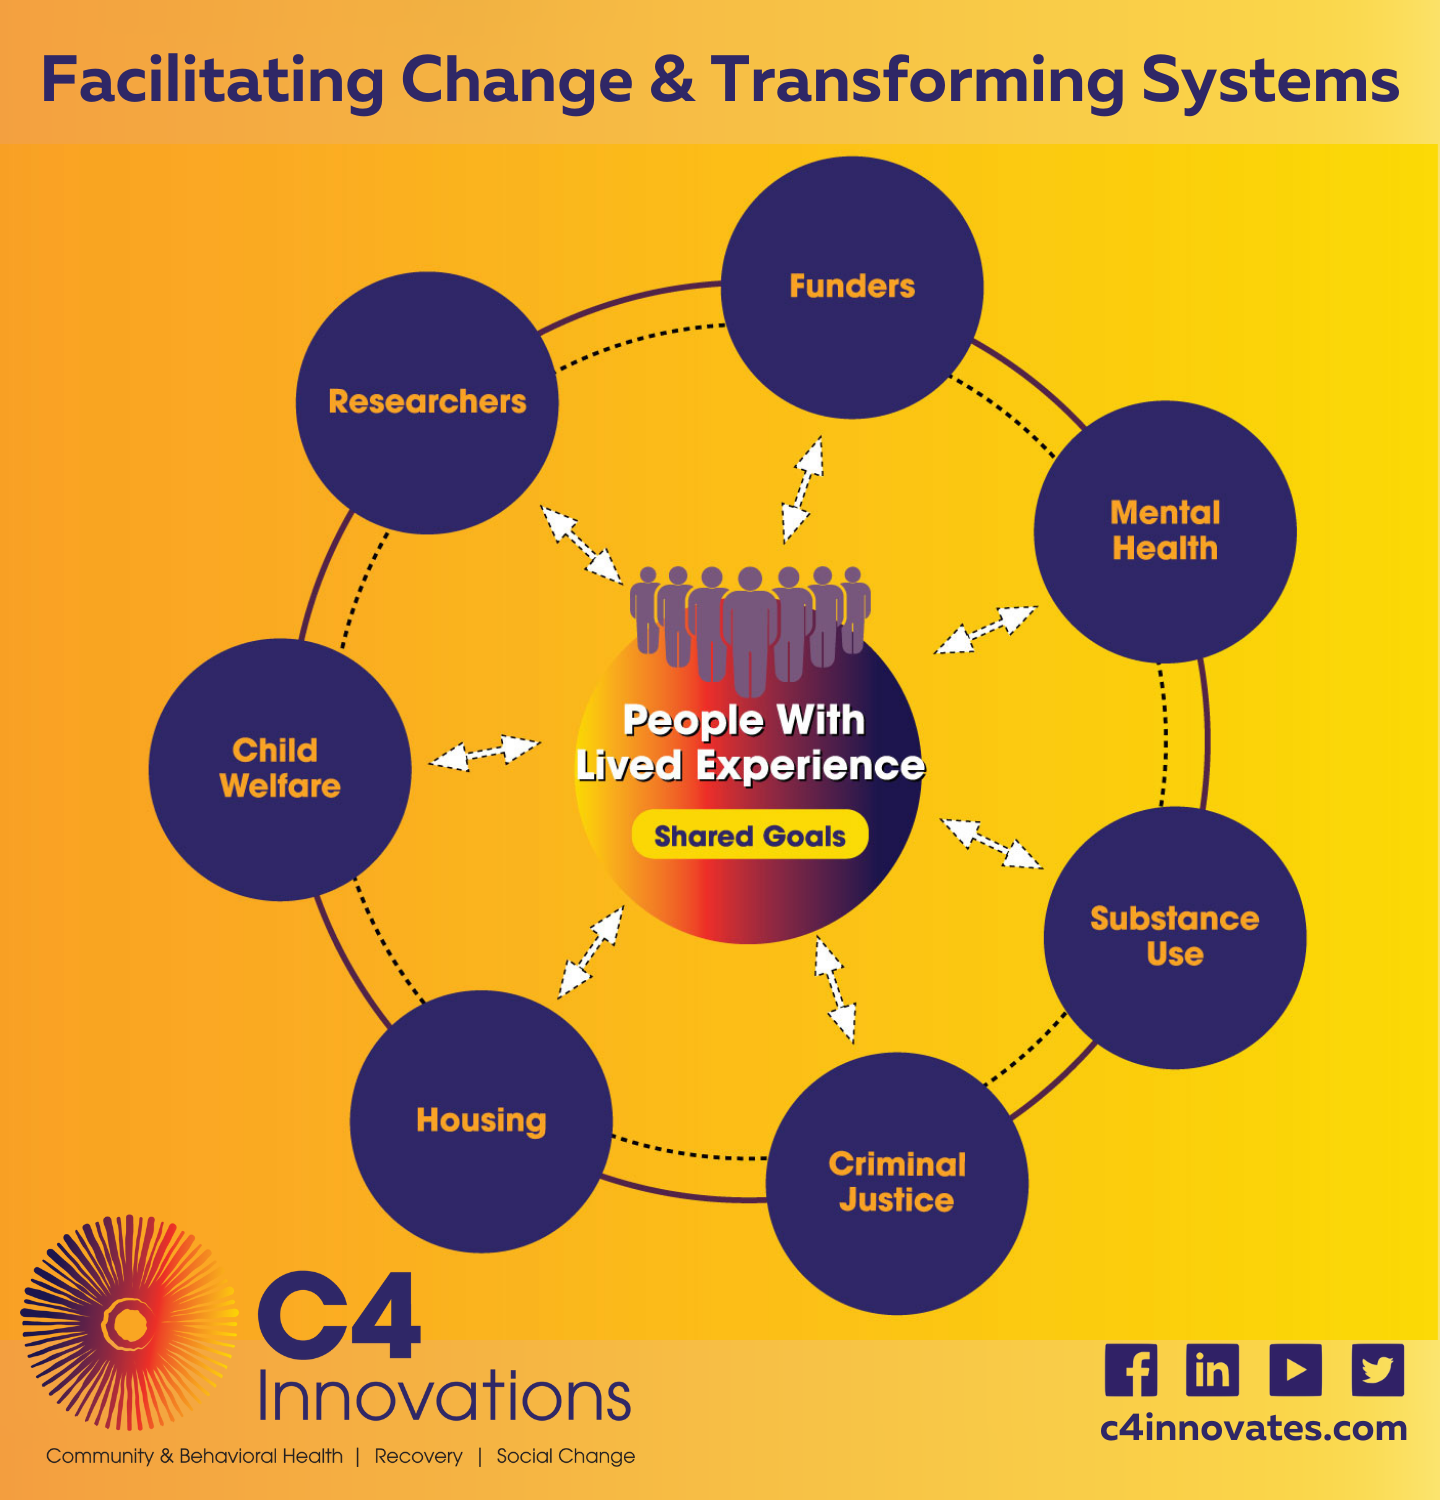 Diagram of Facilitating Change & Transforming Systems for People with Lived Experience